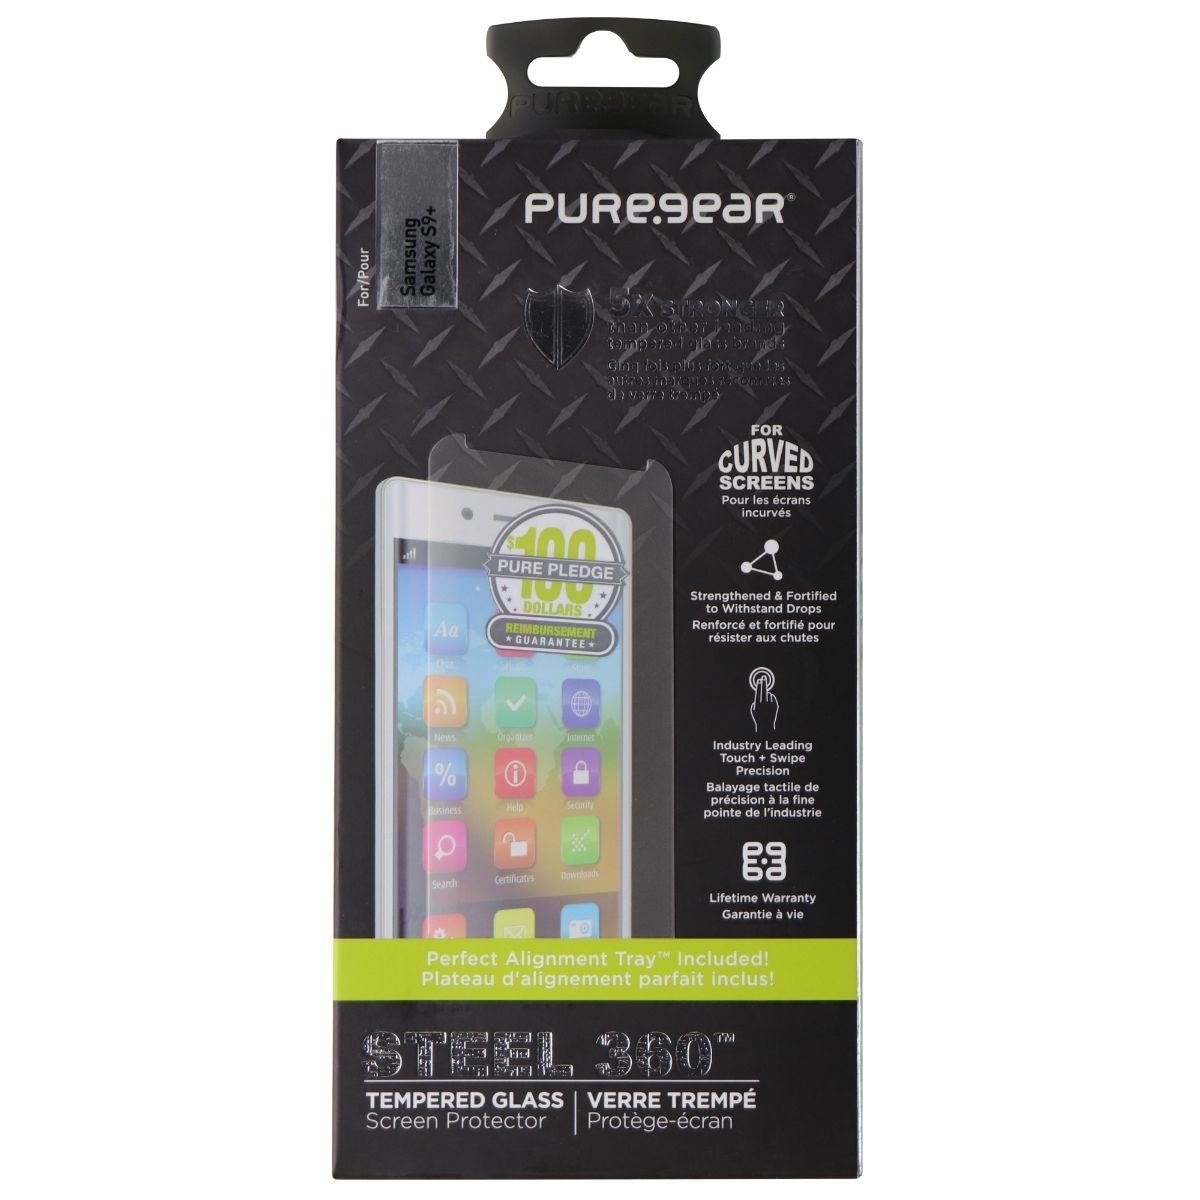 PureGear Steel 360 Tempered Glass Protector For Galaxy S9+ (Plus Model)